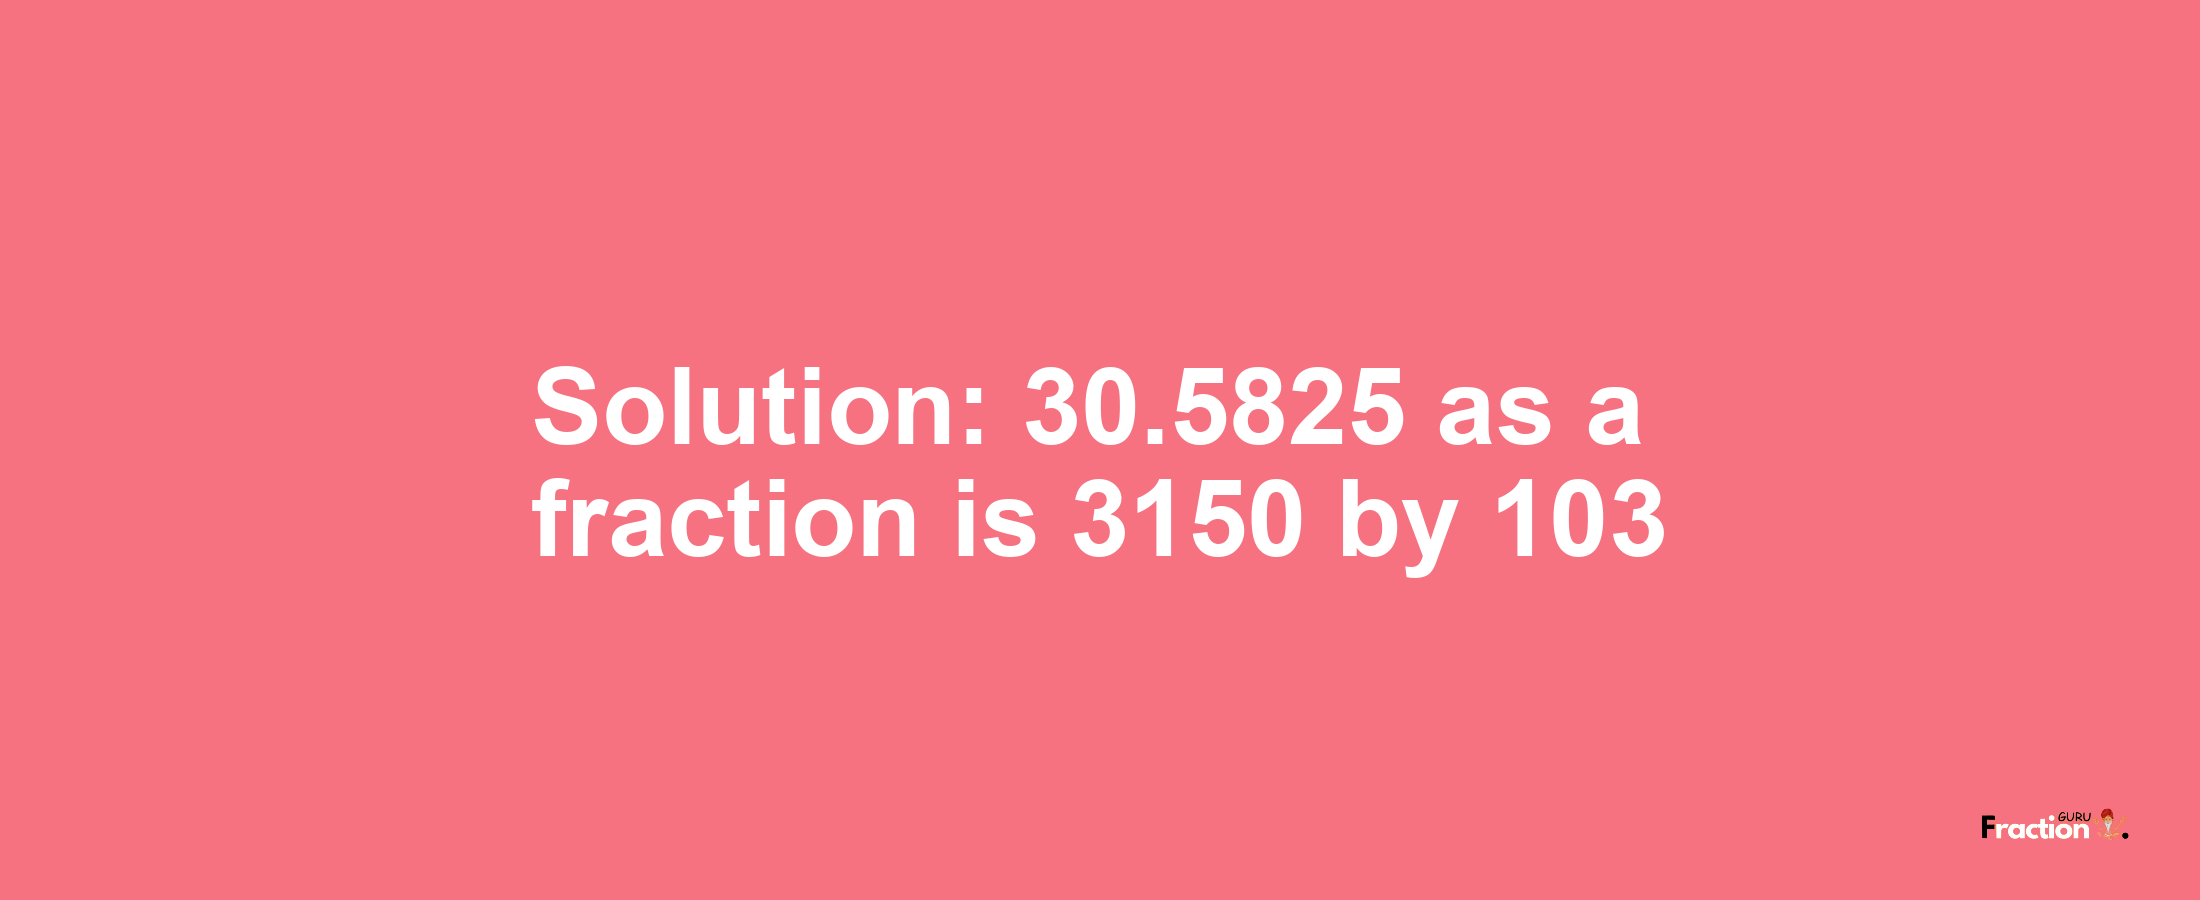 Solution:30.5825 as a fraction is 3150/103